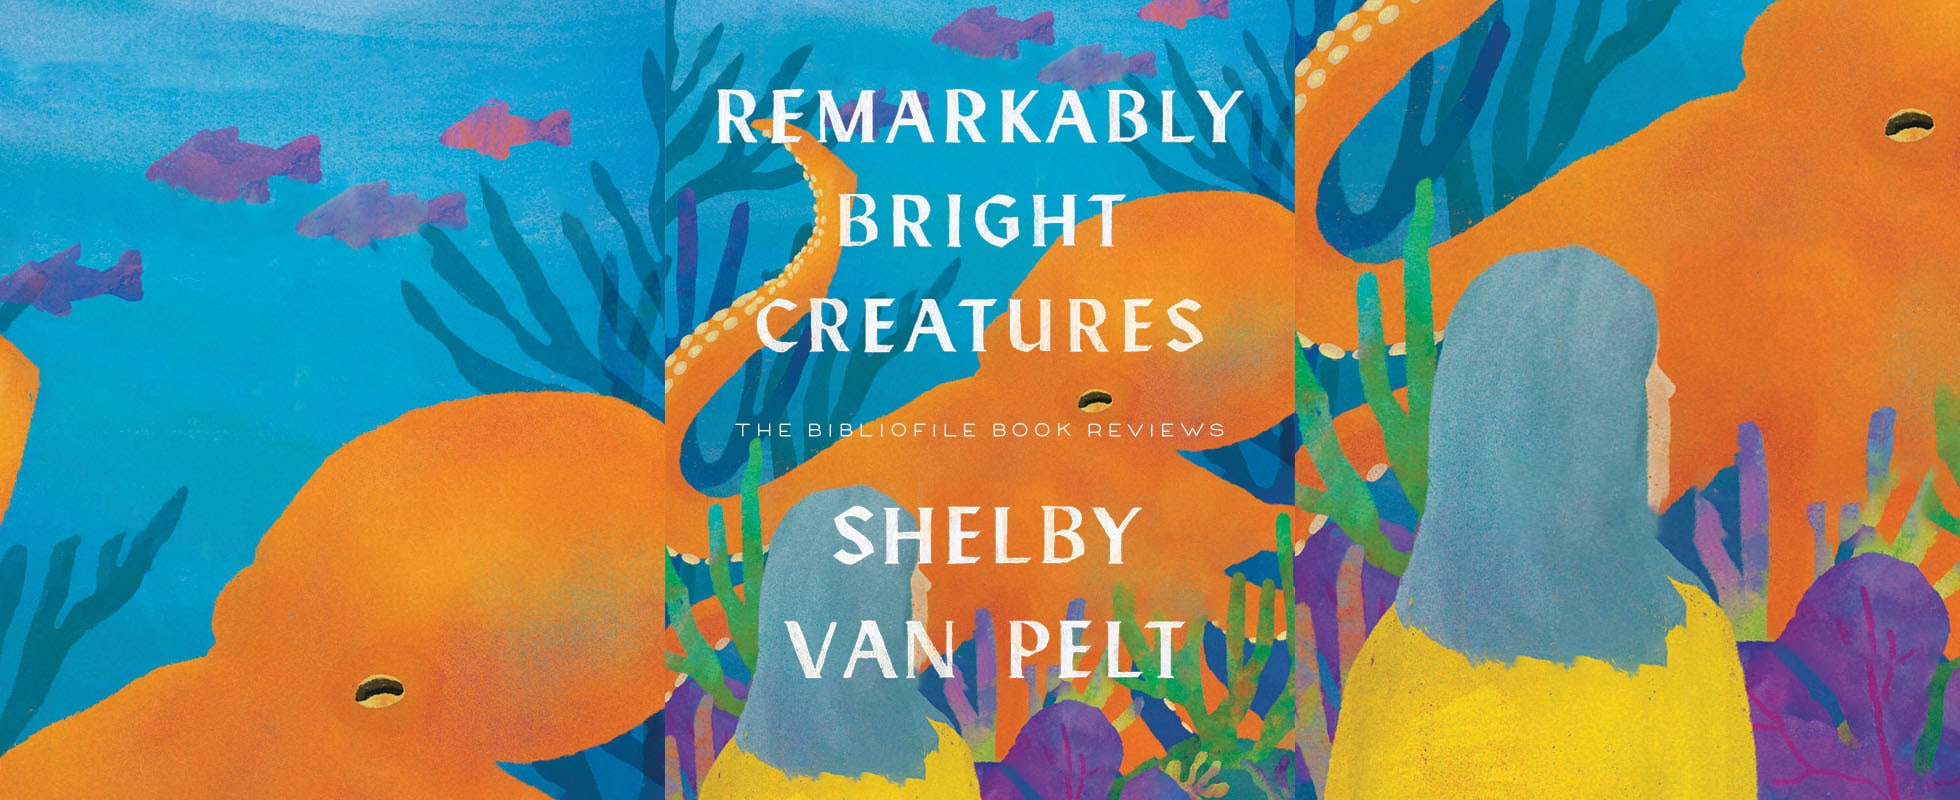 remarkably bright creatures by shelby van pelt book review plot summary synopsis recap discussion questions spoilers